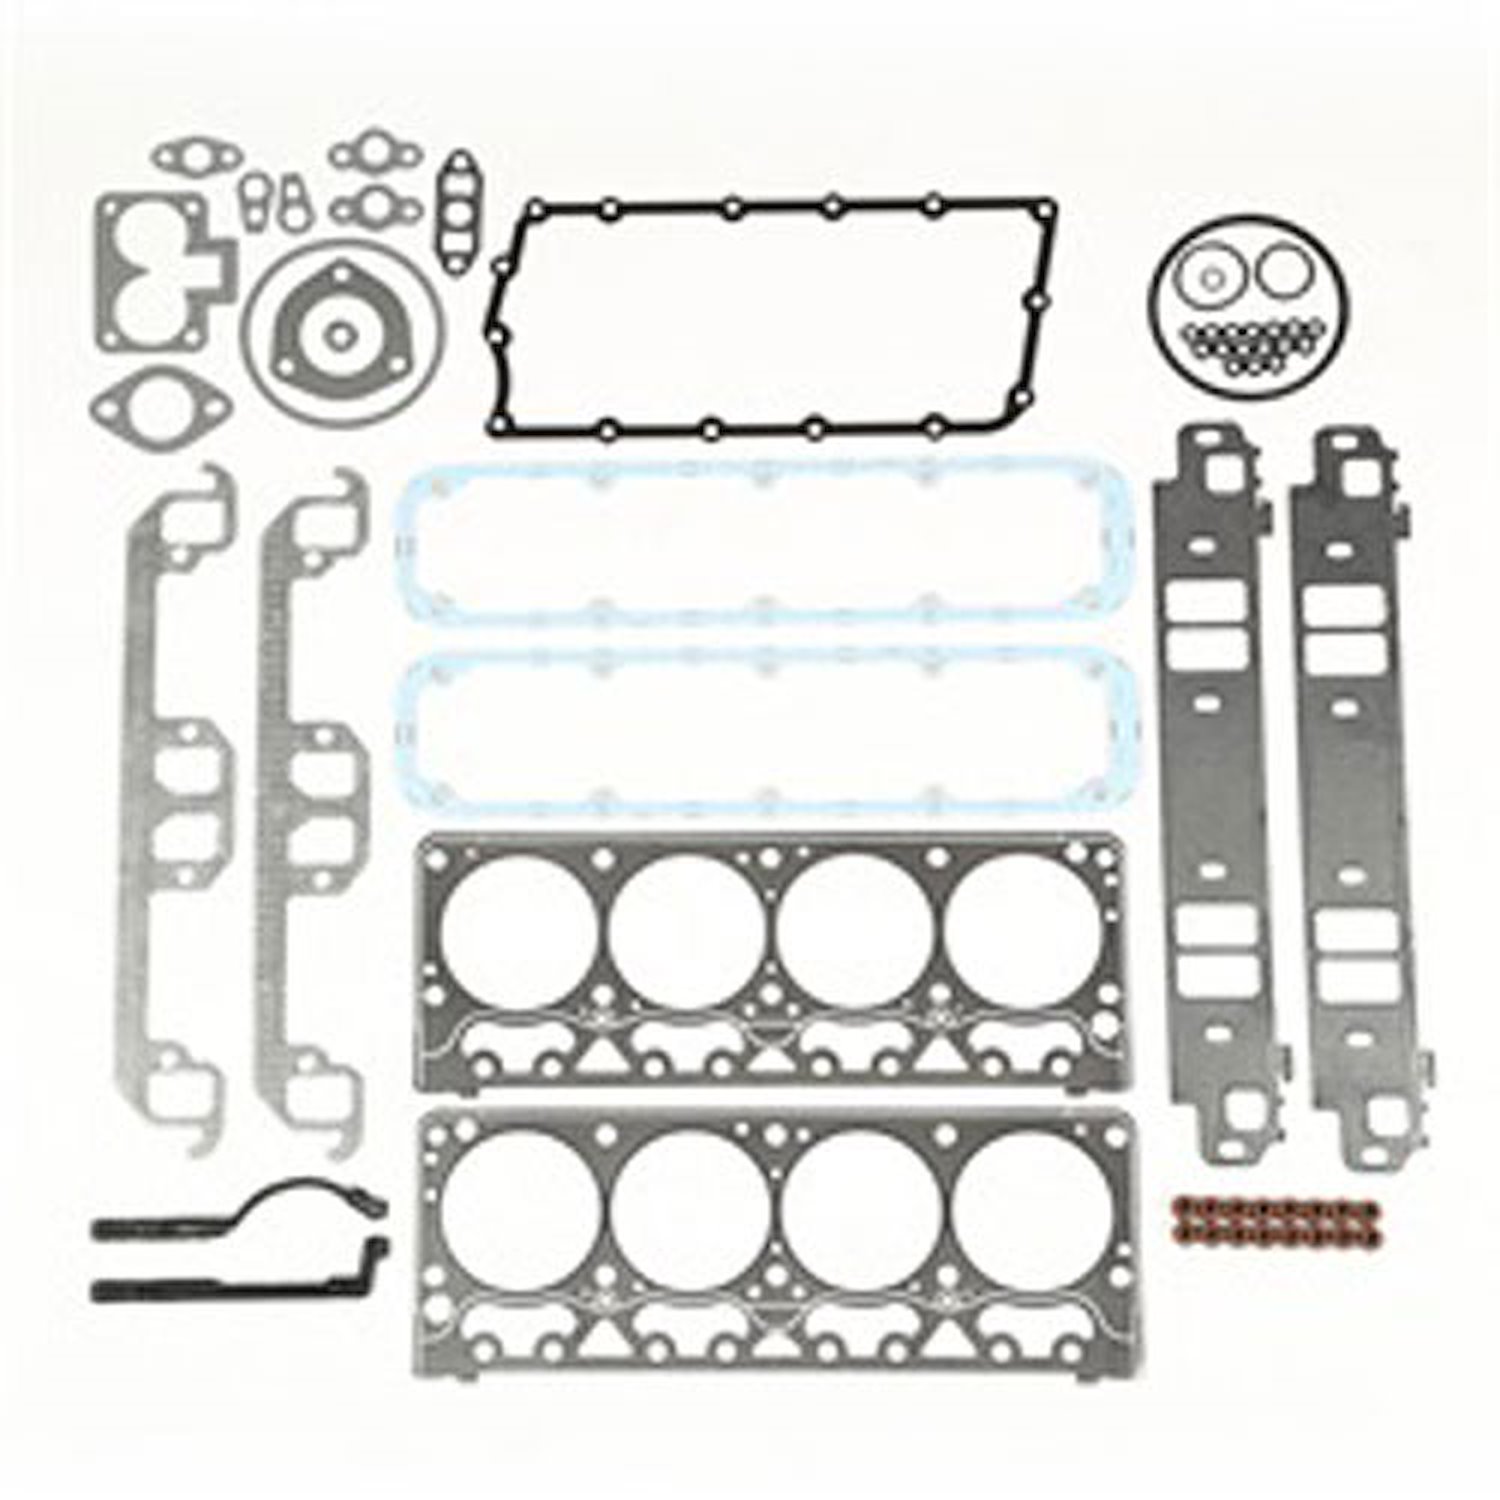 This upper engine gasket set from Omix-ADA fits